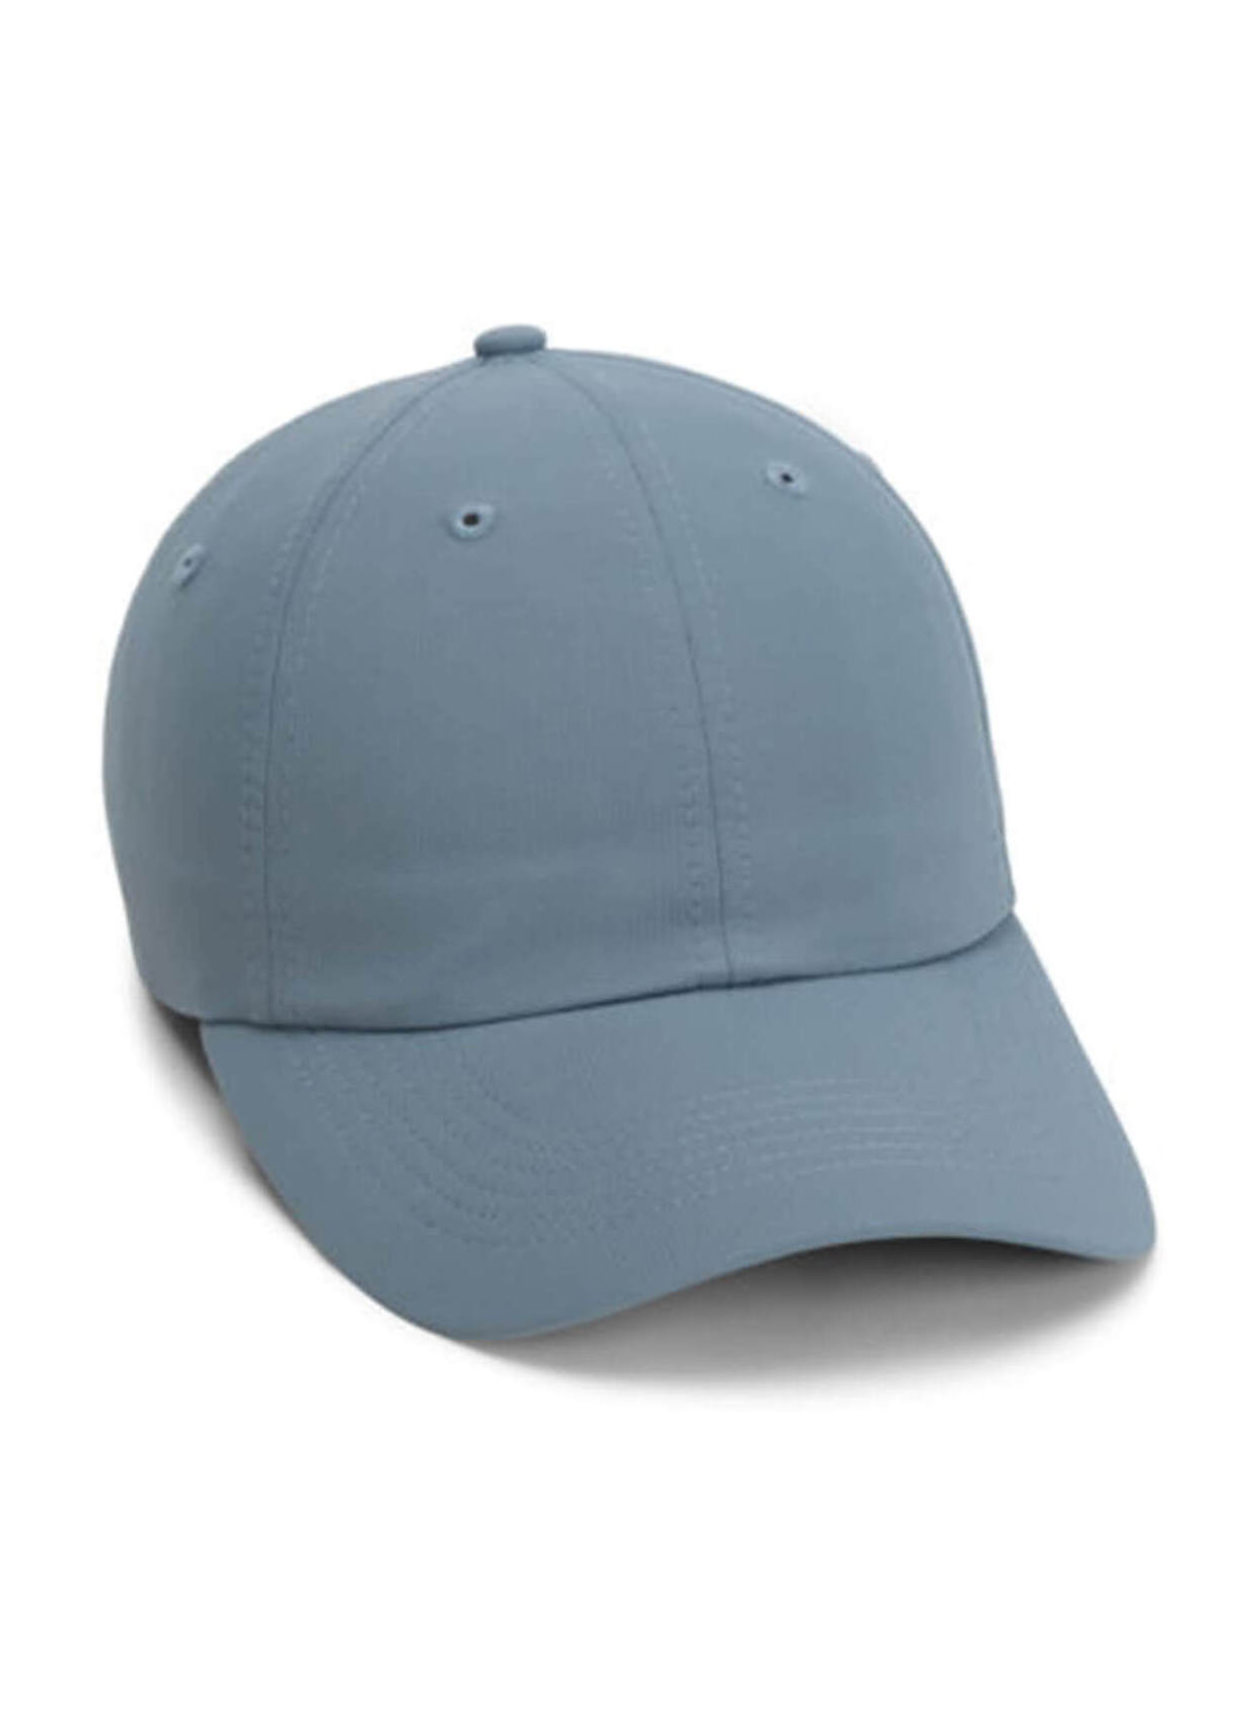 Imperial Breaker Blue Original Small Fit Performance Hat